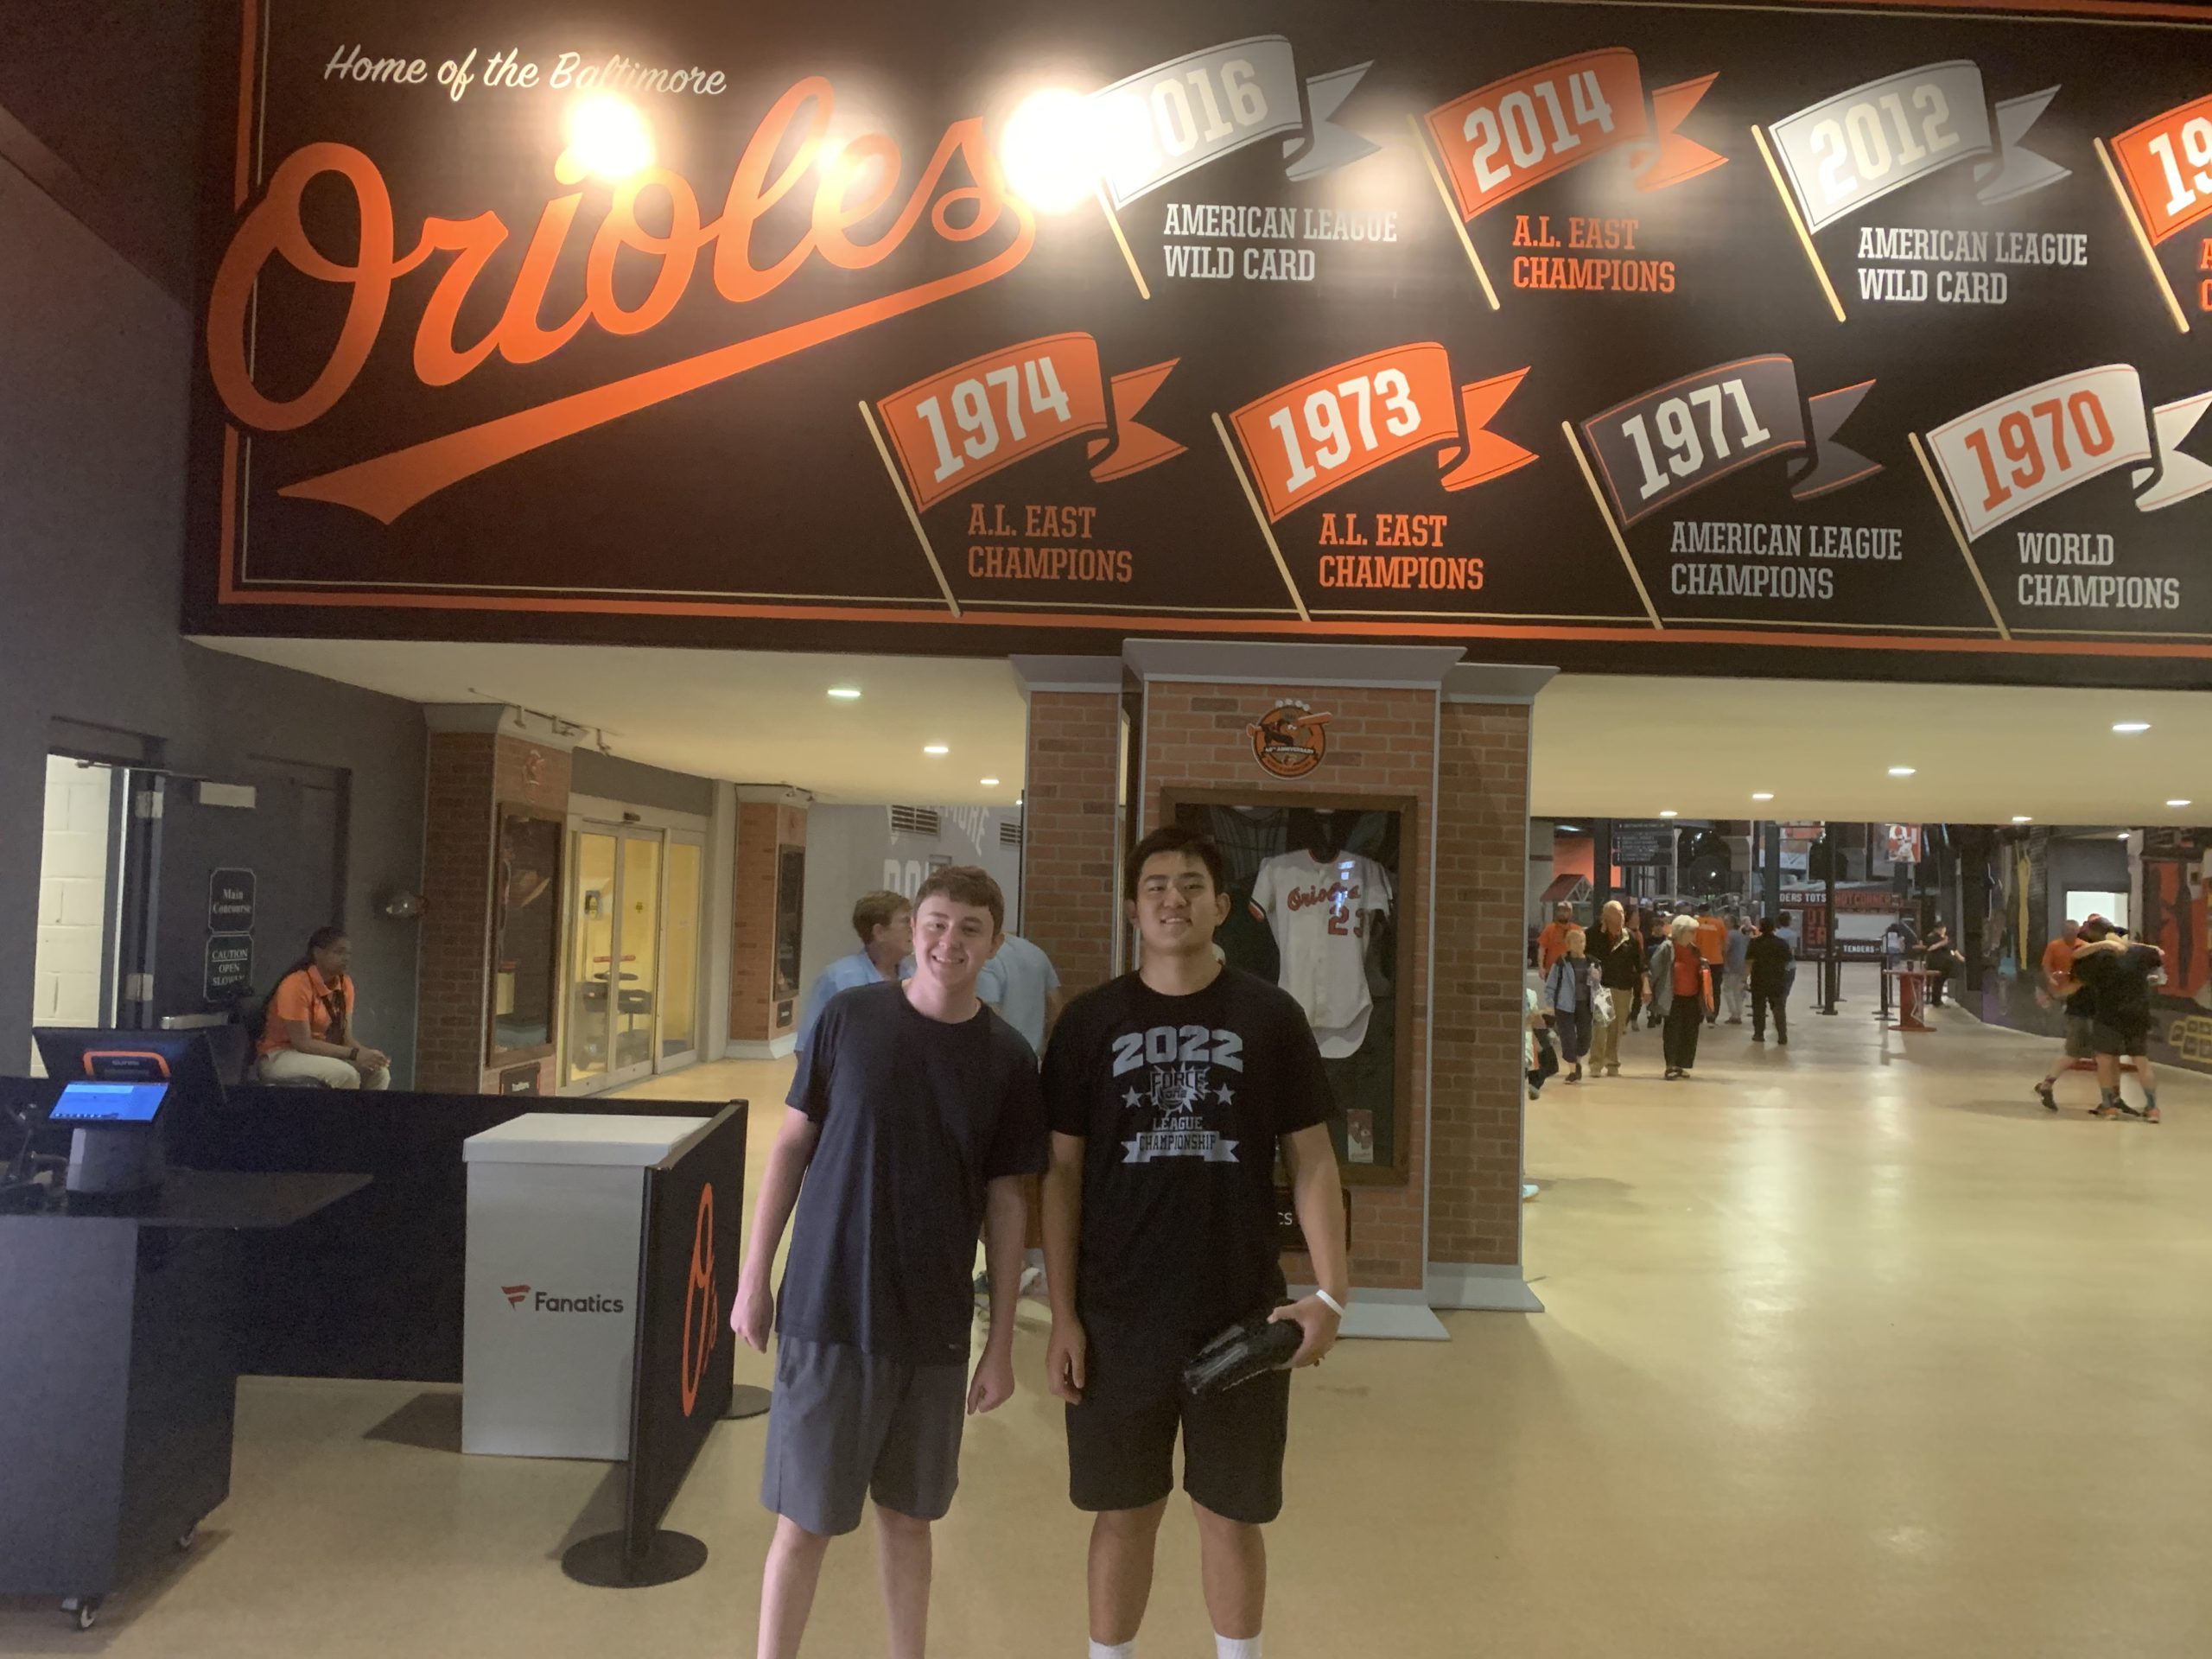 Seniors Darren Shapiro and John Wang enjoyed their summer break, which included watching a Baltimore Orioles game.